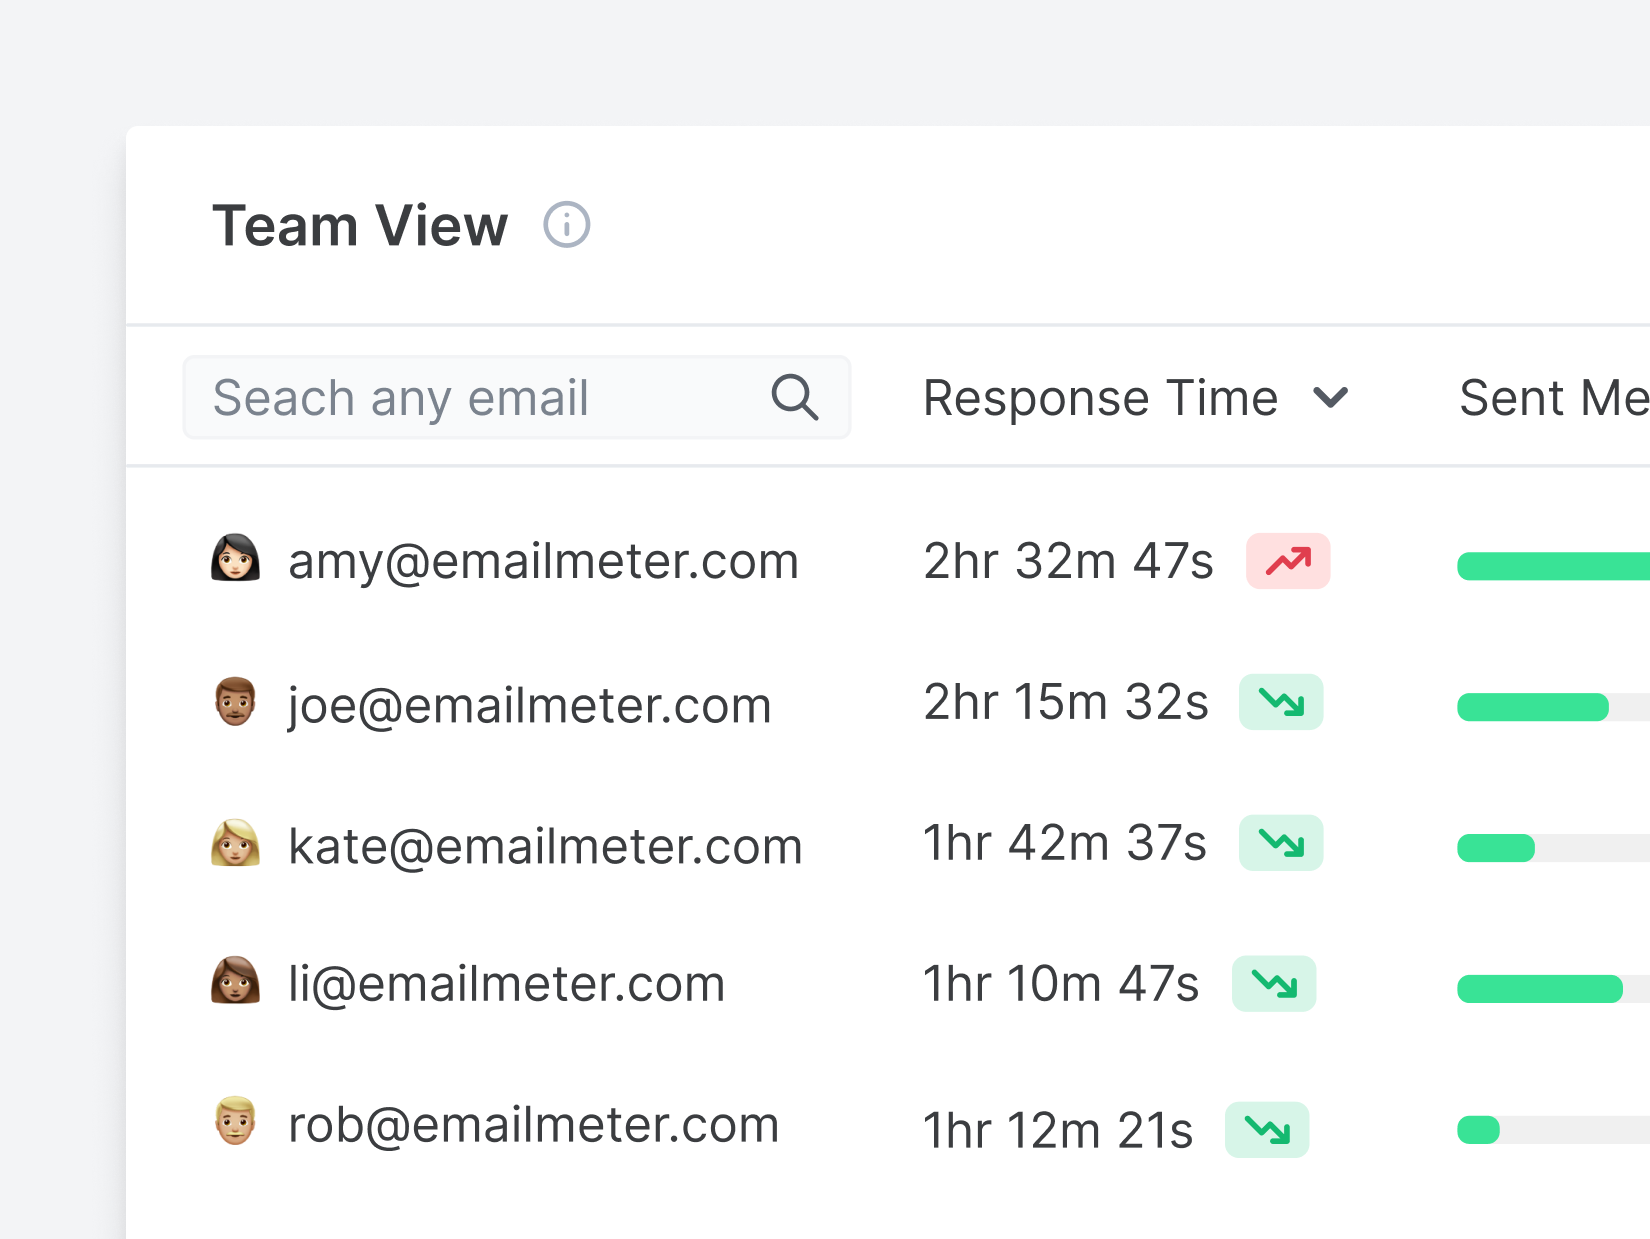 Track your team's productivity, including individual performance on delegated mailboxes